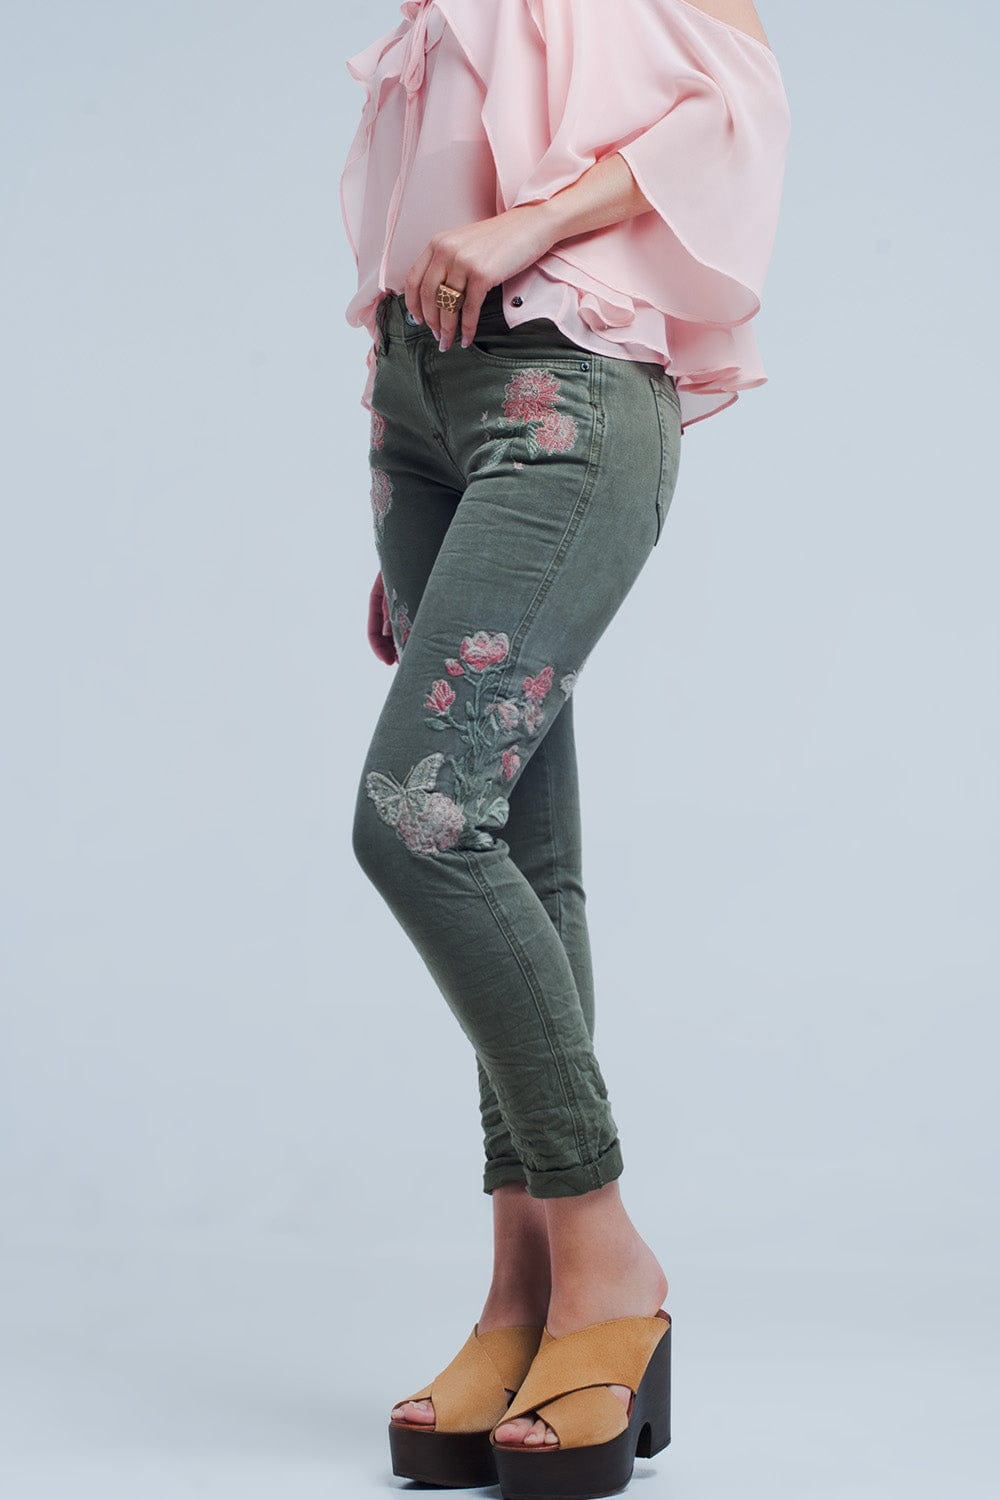 Q2 Women's Jean Khaki Jeans with Embroidered Flower